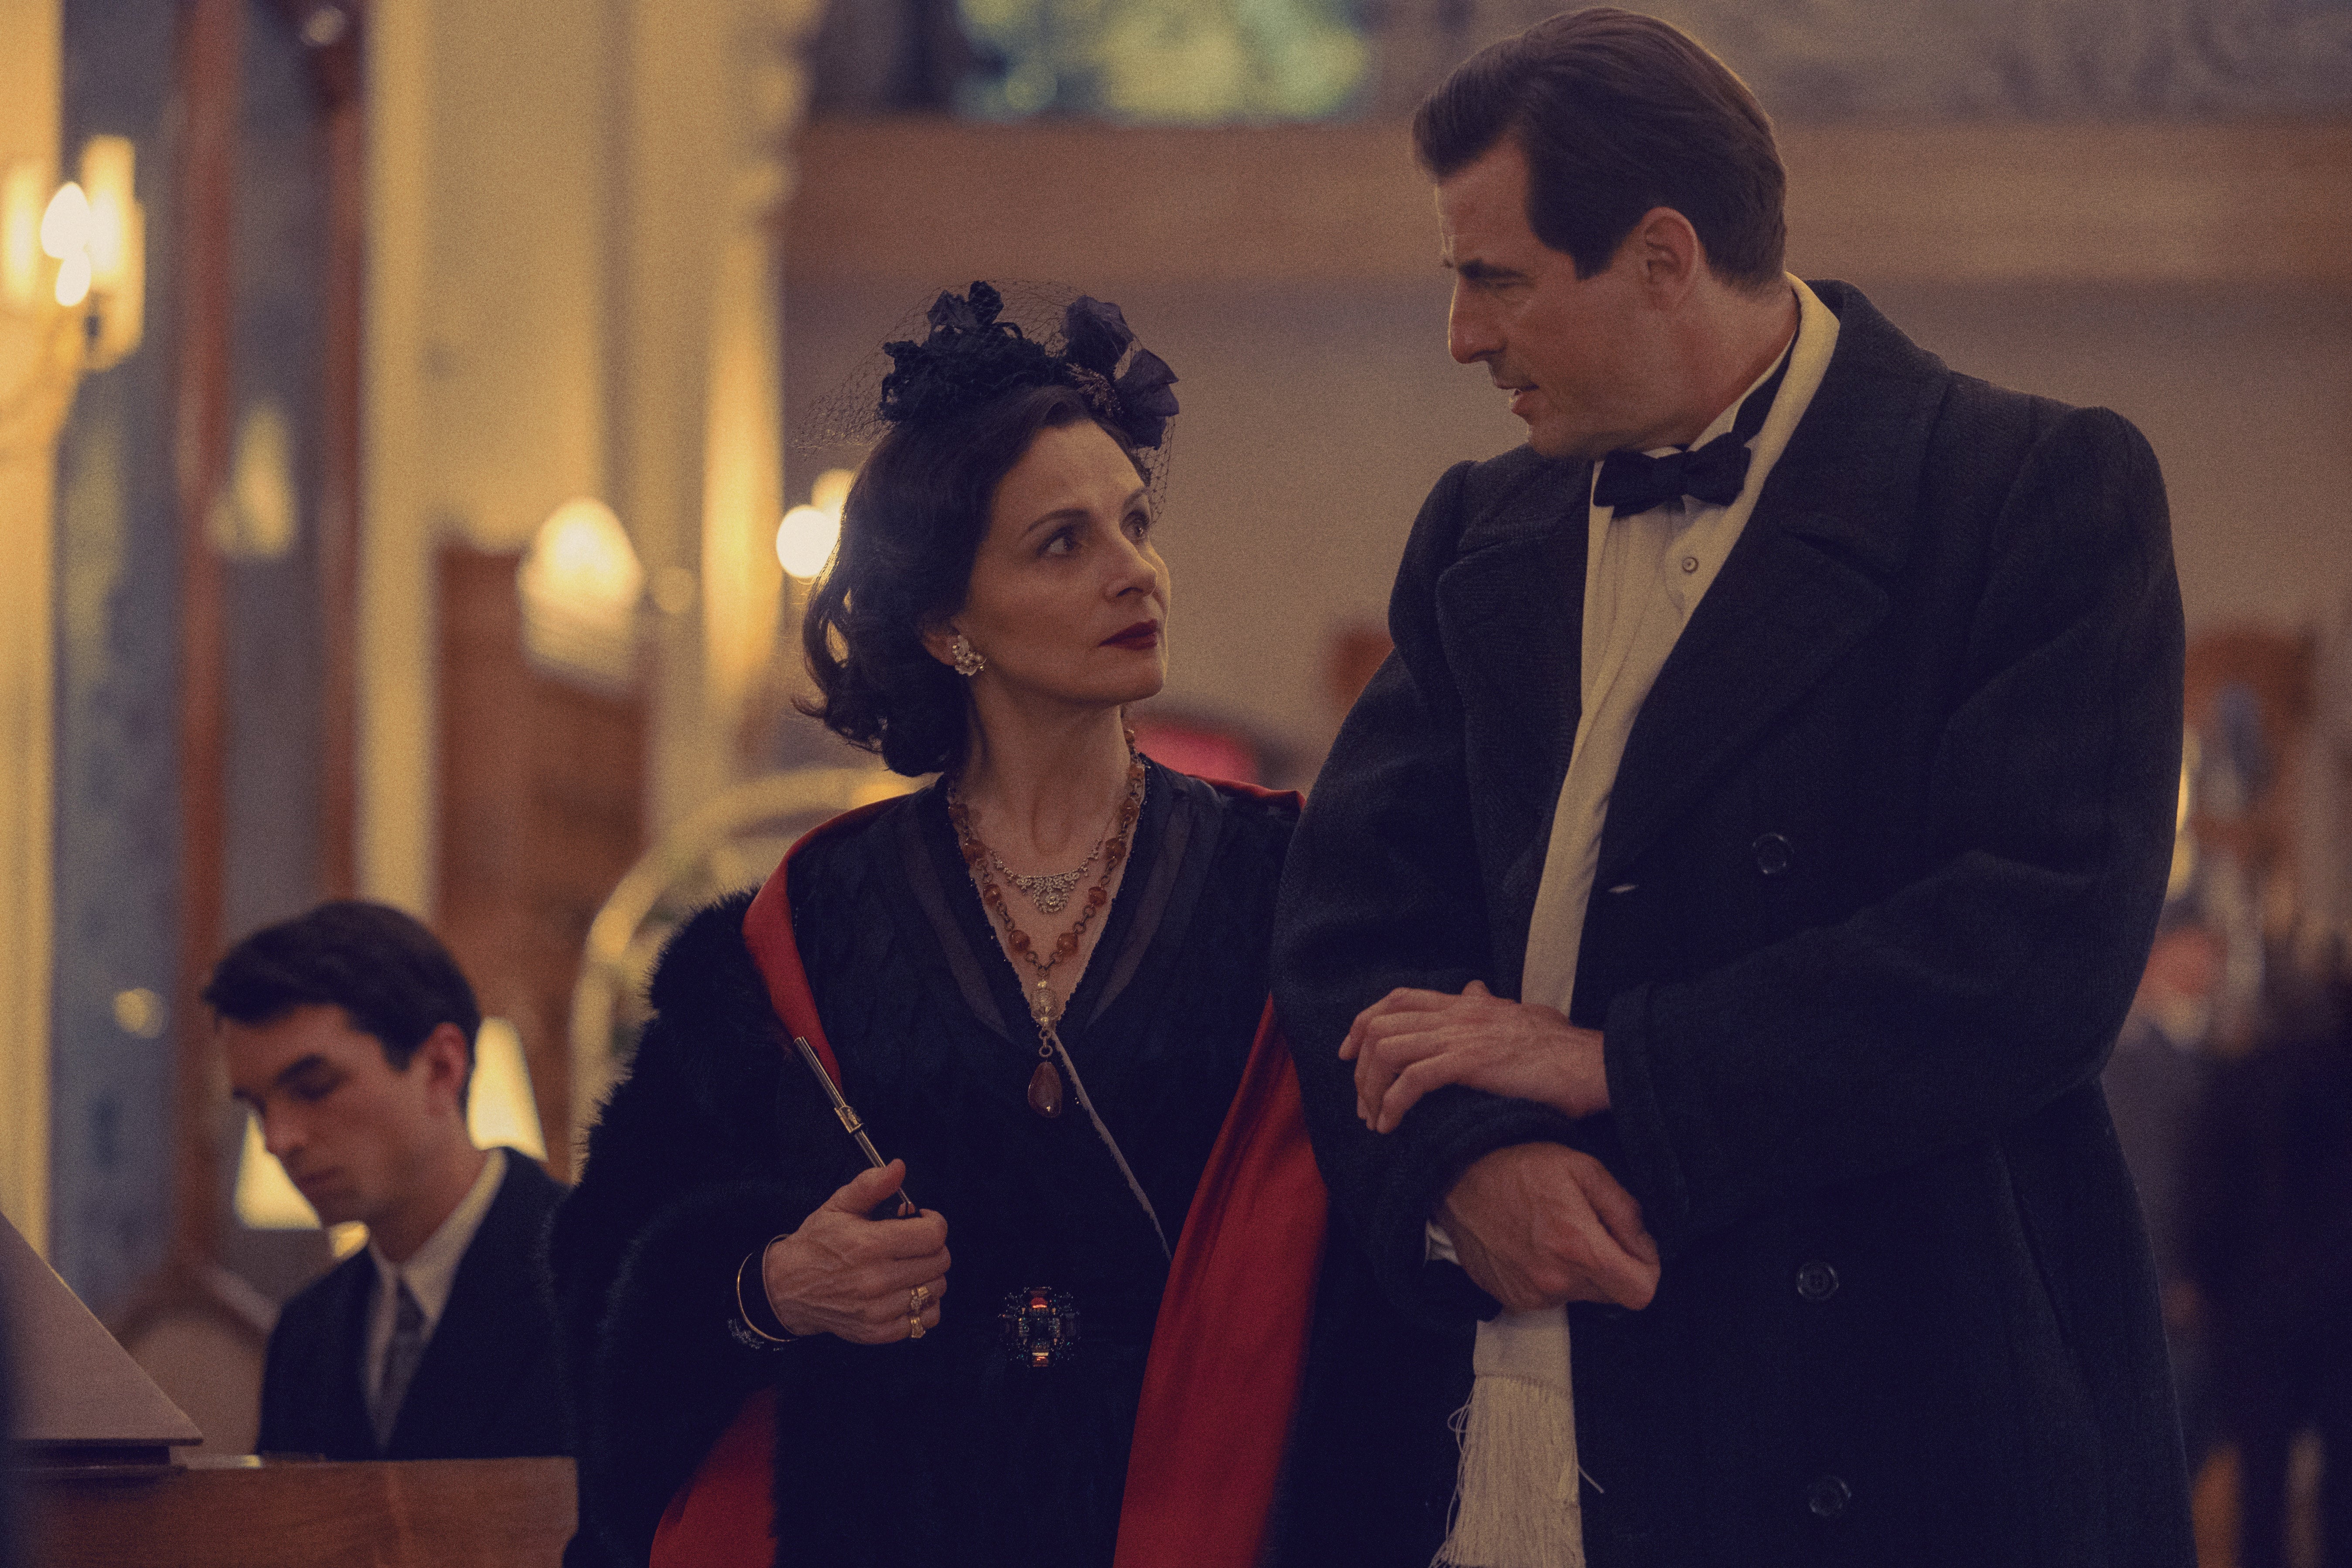 Juliette Binoche and Claes Bang as Coco Chanel and Baron Hans von Dincklage in ‘The New Look’